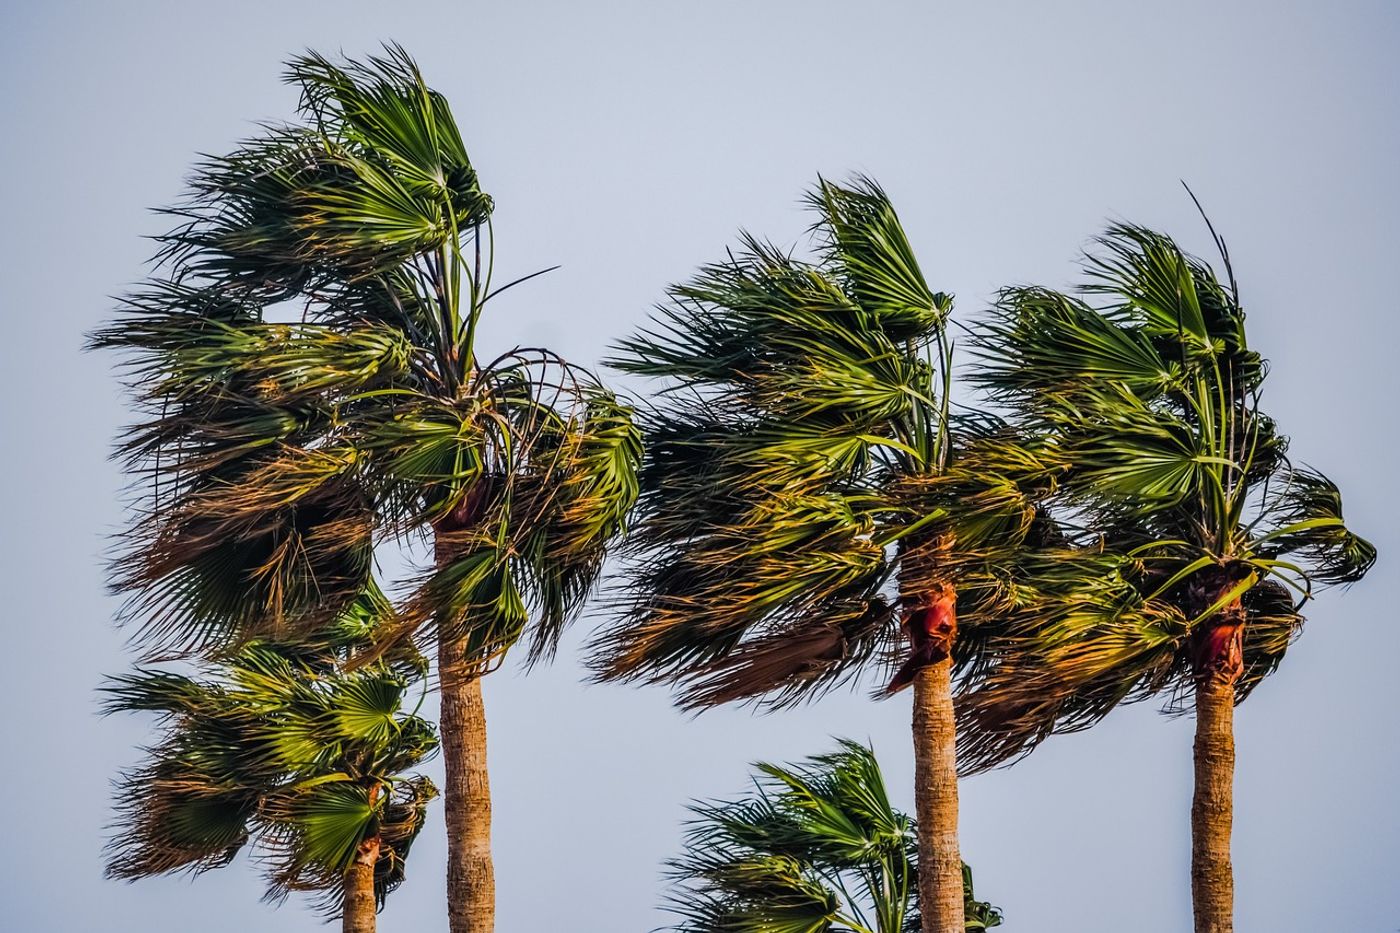 Climate change may be causing palm trees to migrate further Northward in the wake of warming temperatures at higher latitudes.